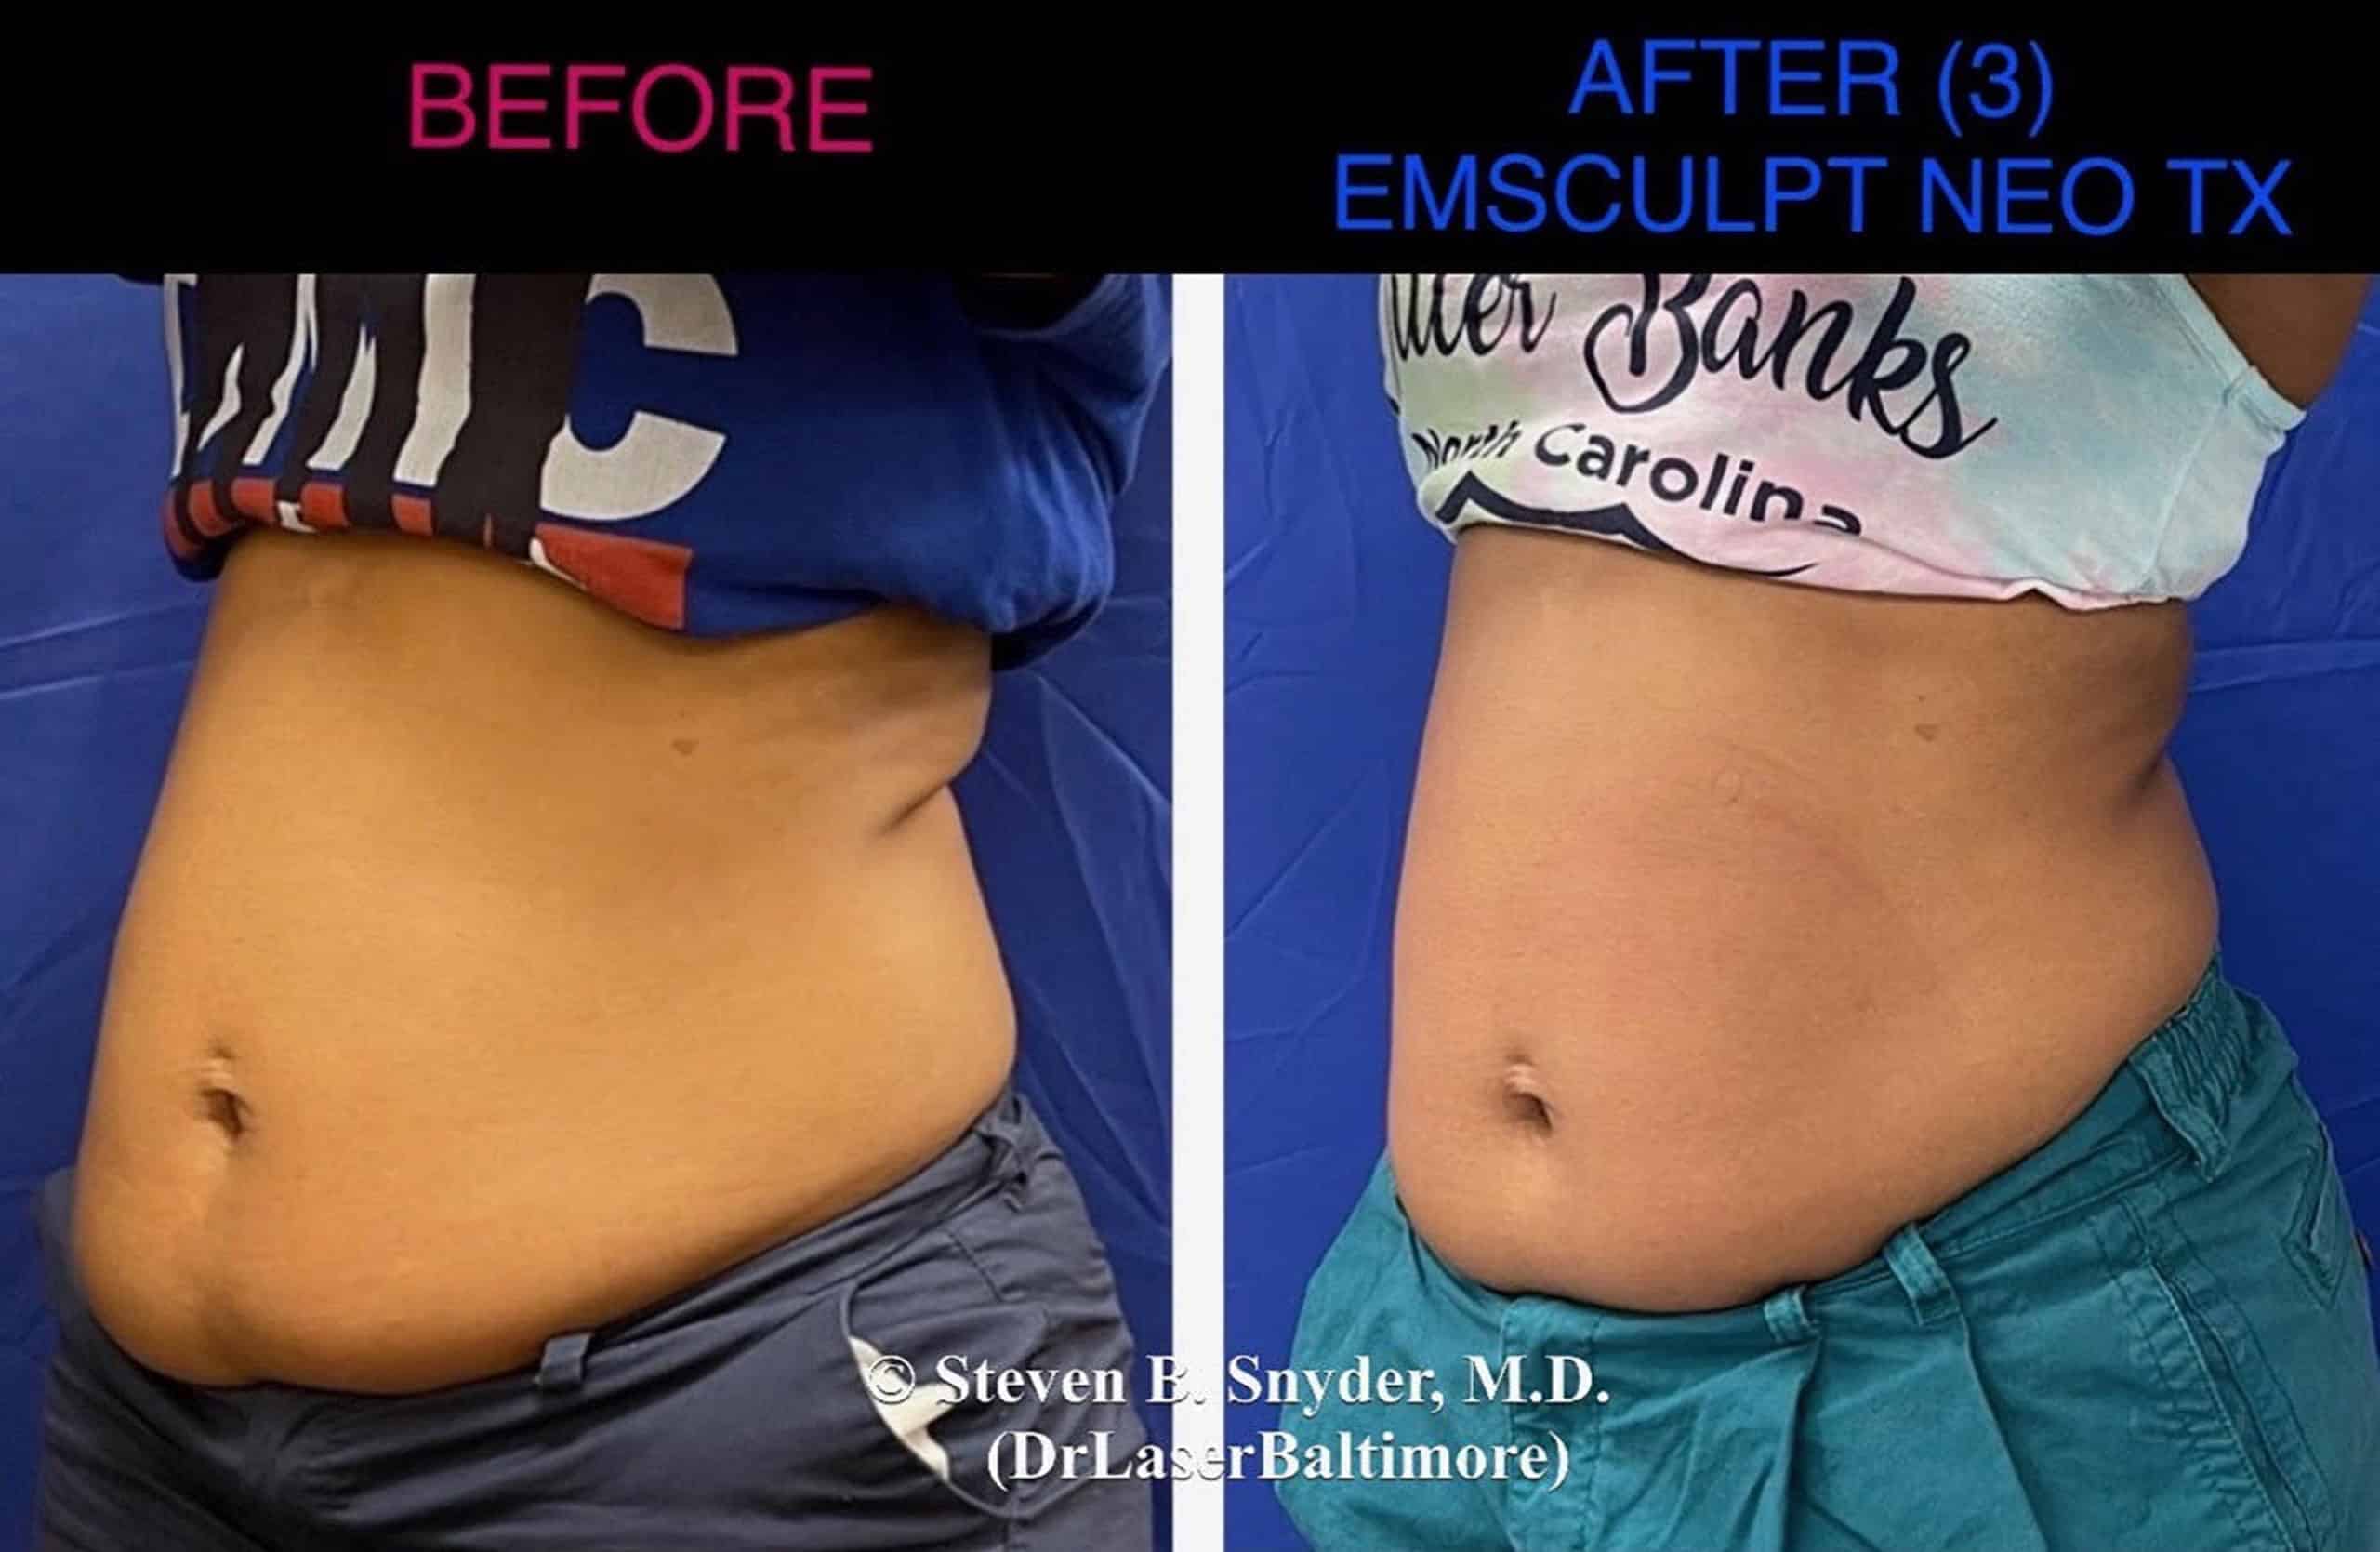 A woman's abdomen before and after the emsculpt procedure showing more fat before and less fat after.